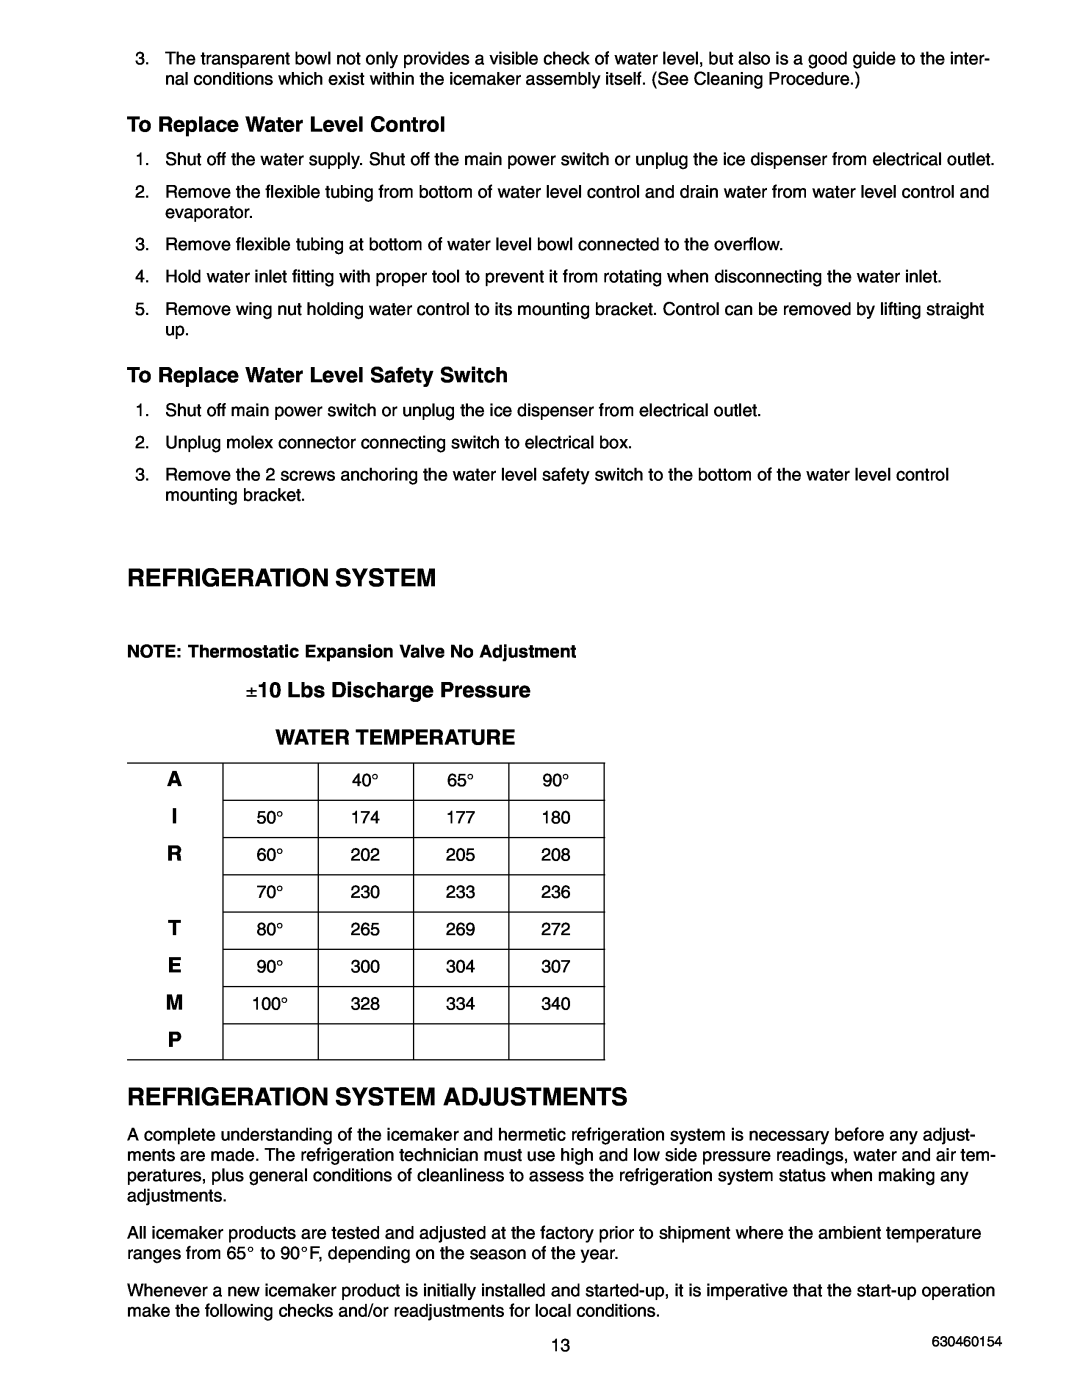 Cornelius UCR 700 Series service manual Refrigeration System Adjustments, To Replace Water Level Control 